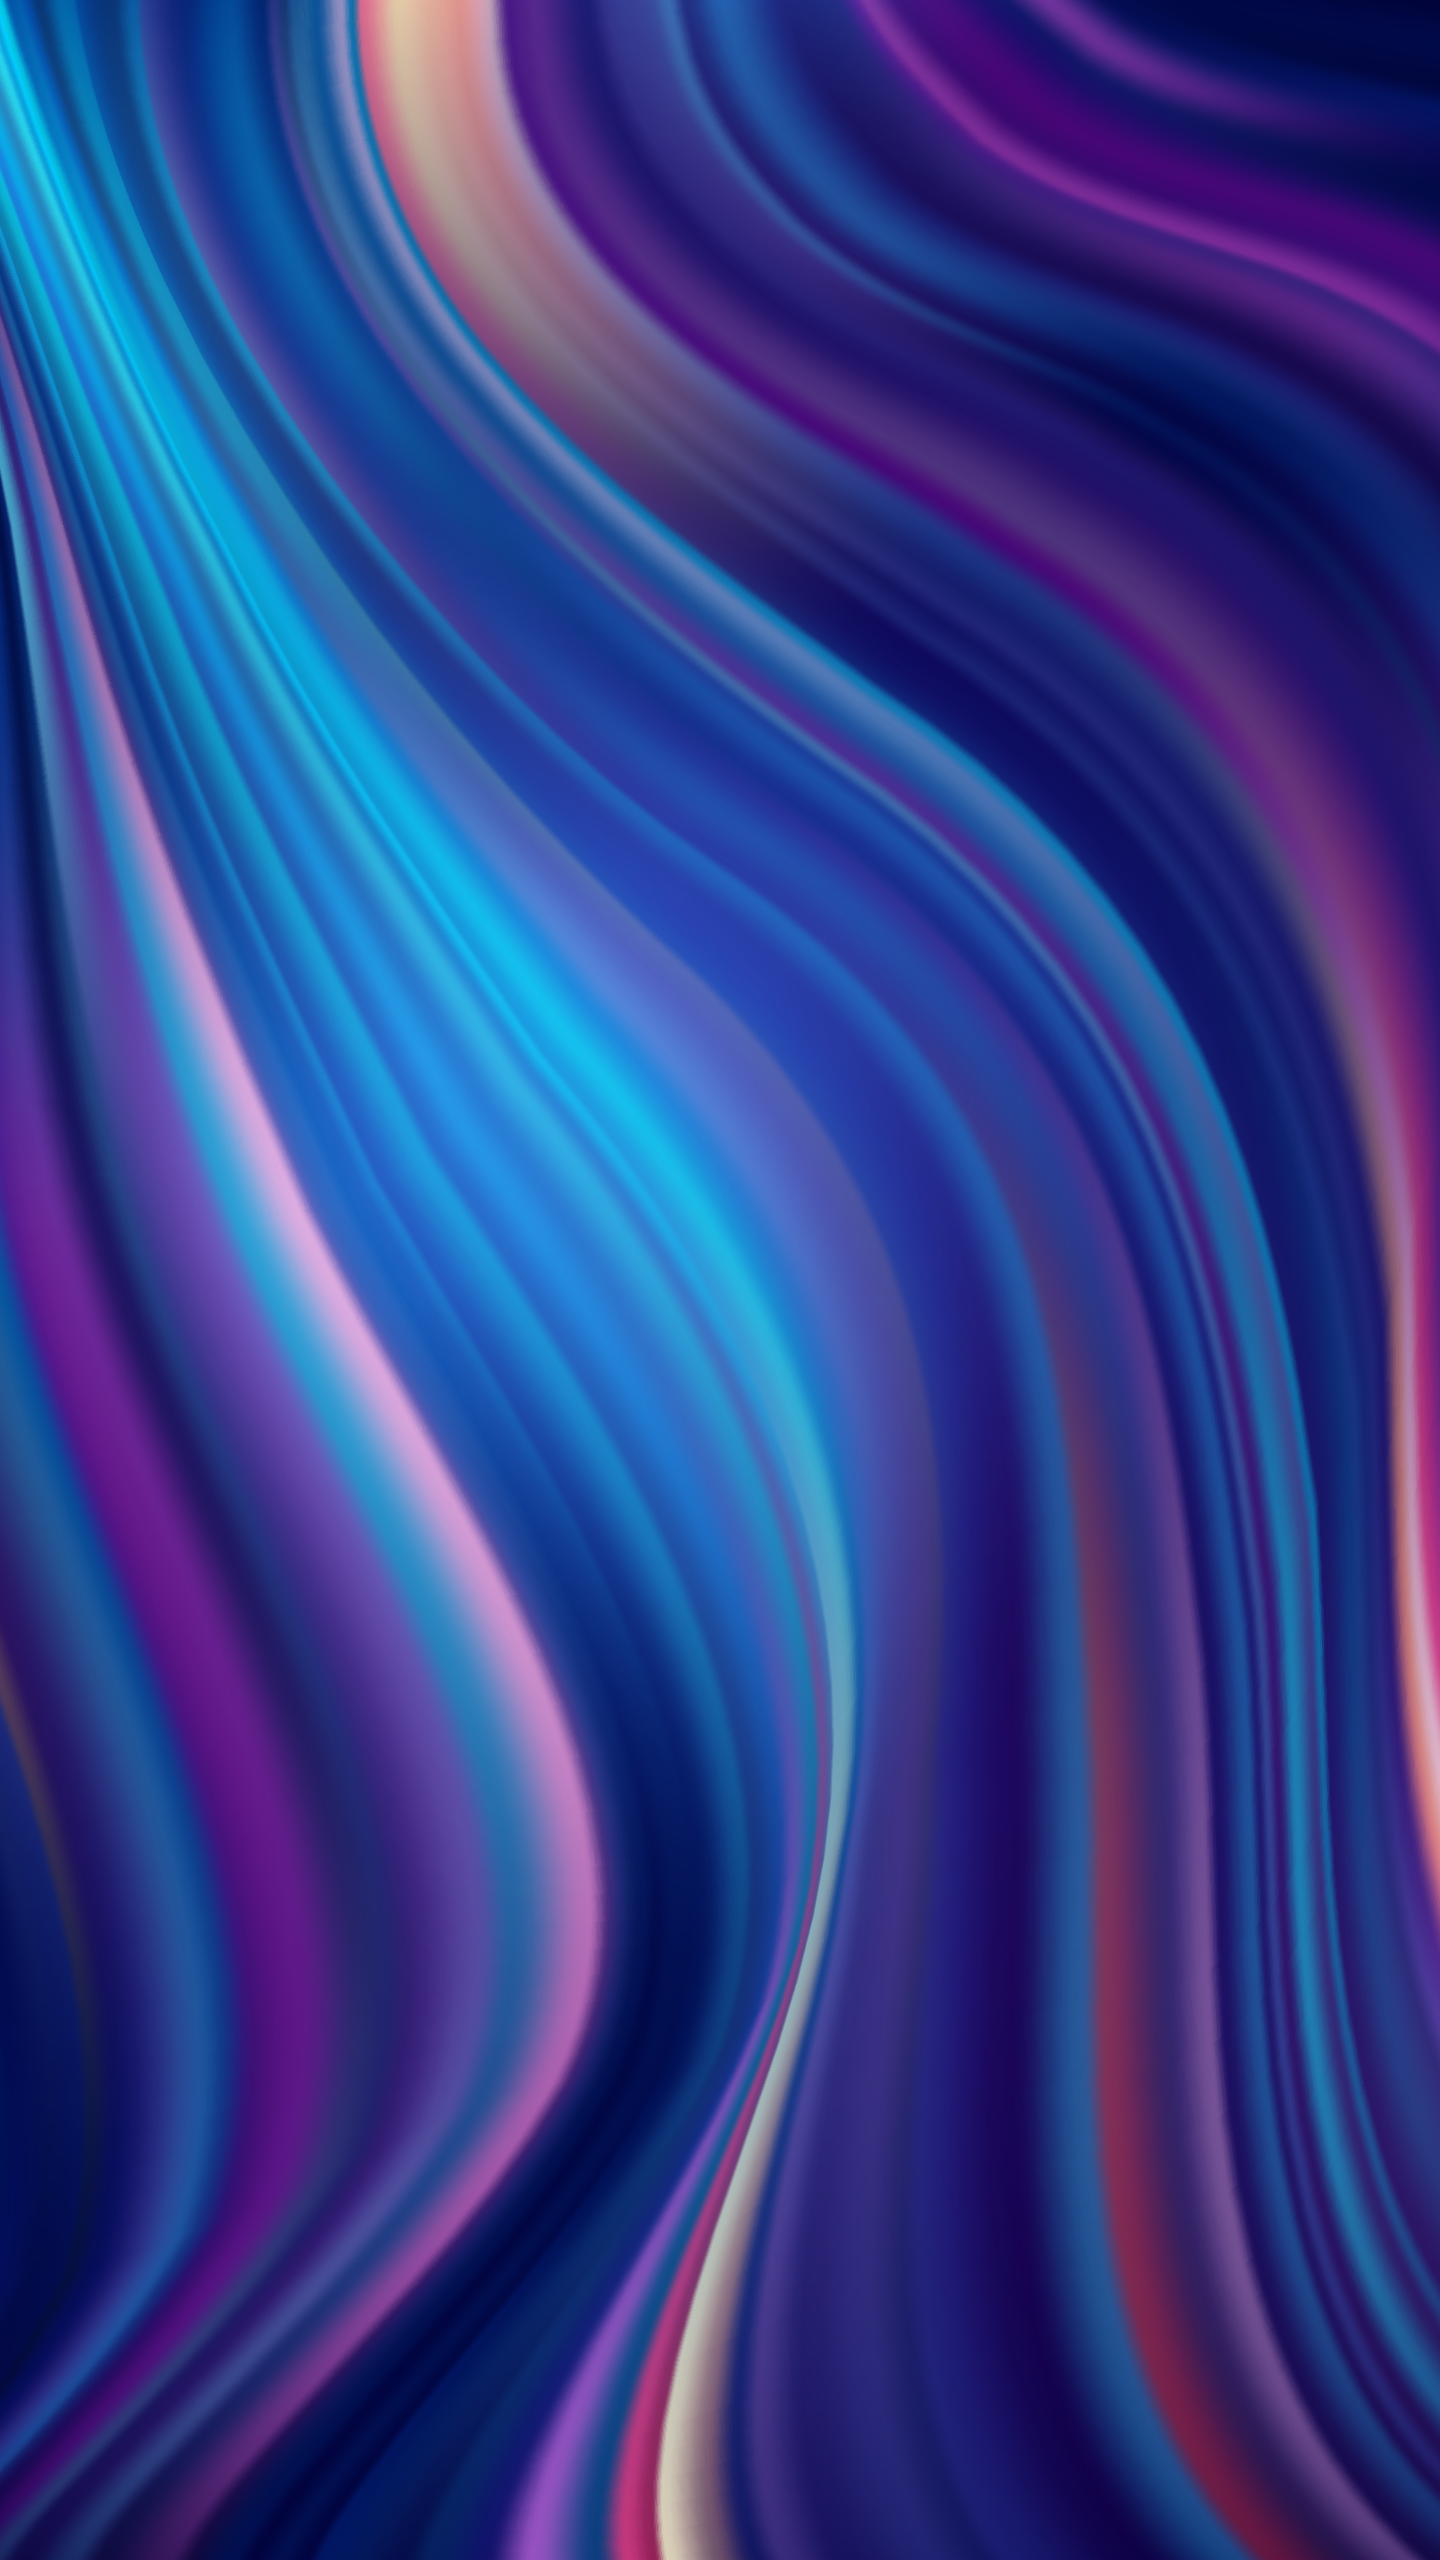 Abstract Spark Wallpapers